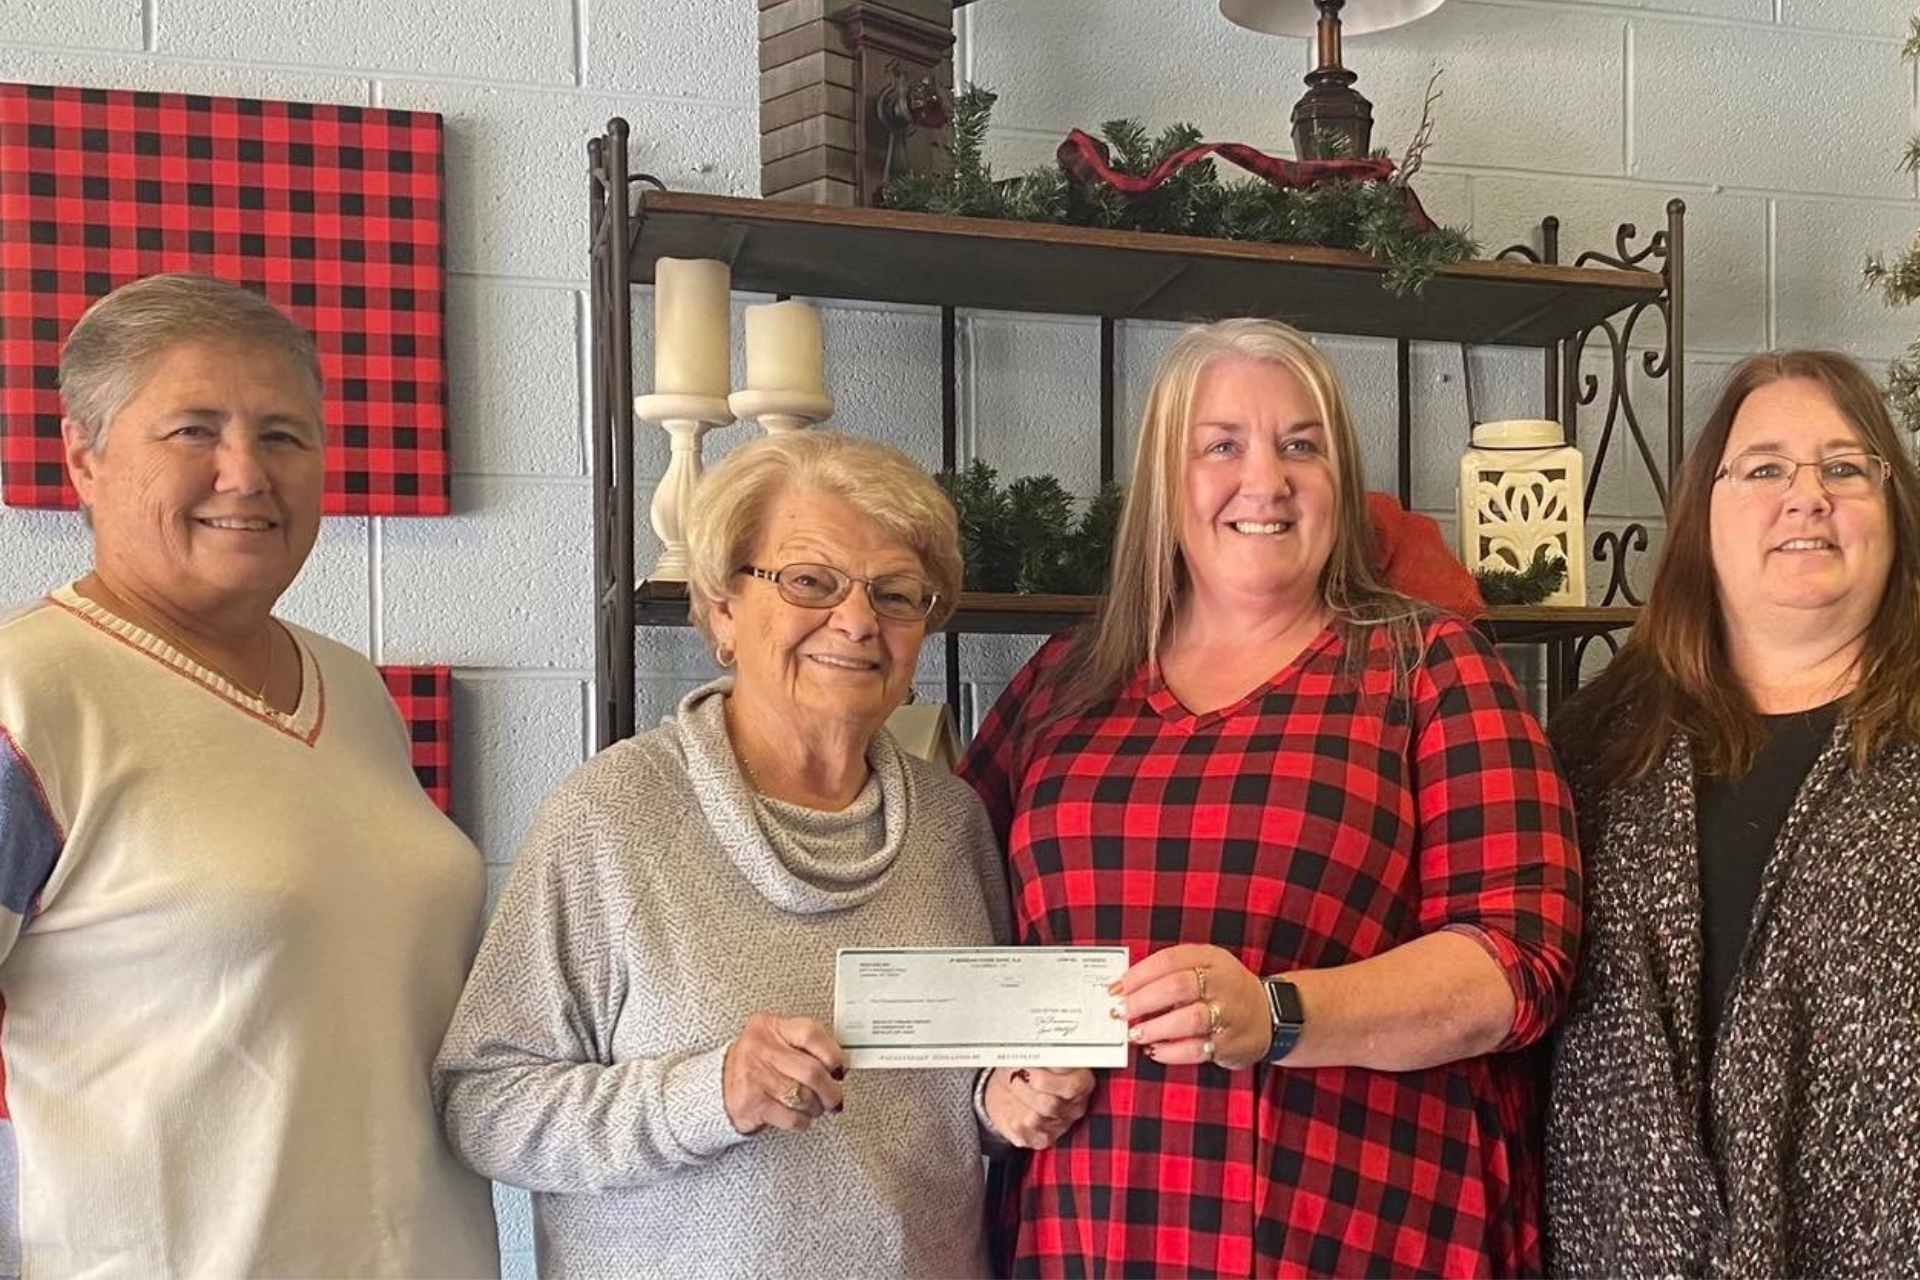 On November 22, 2021, ResCare Community Living of Beckley presented a $5,000 donation to Fishes and Loaves. Pictured: Marsha Smith (Fishes and Loaves), Shelby Warden (Fishes and Loaves), Terry Redden (ResCare), Cathy Redden (ResCare)